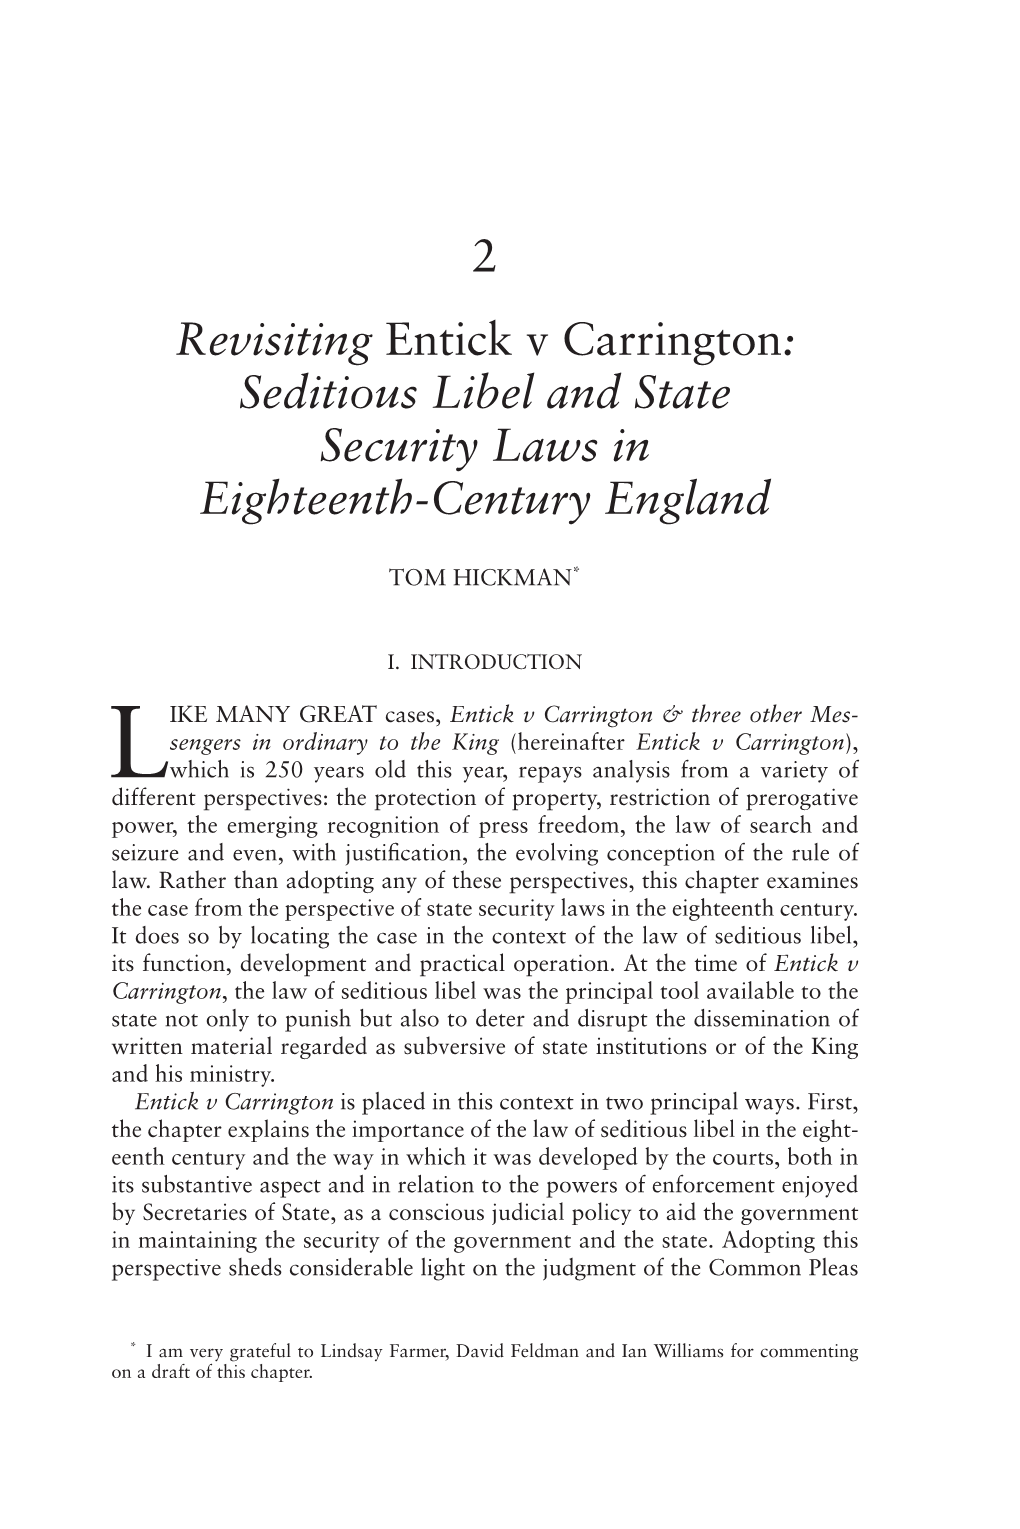 2 Revisiting Entick V Carrington: Seditious Libel and State Security